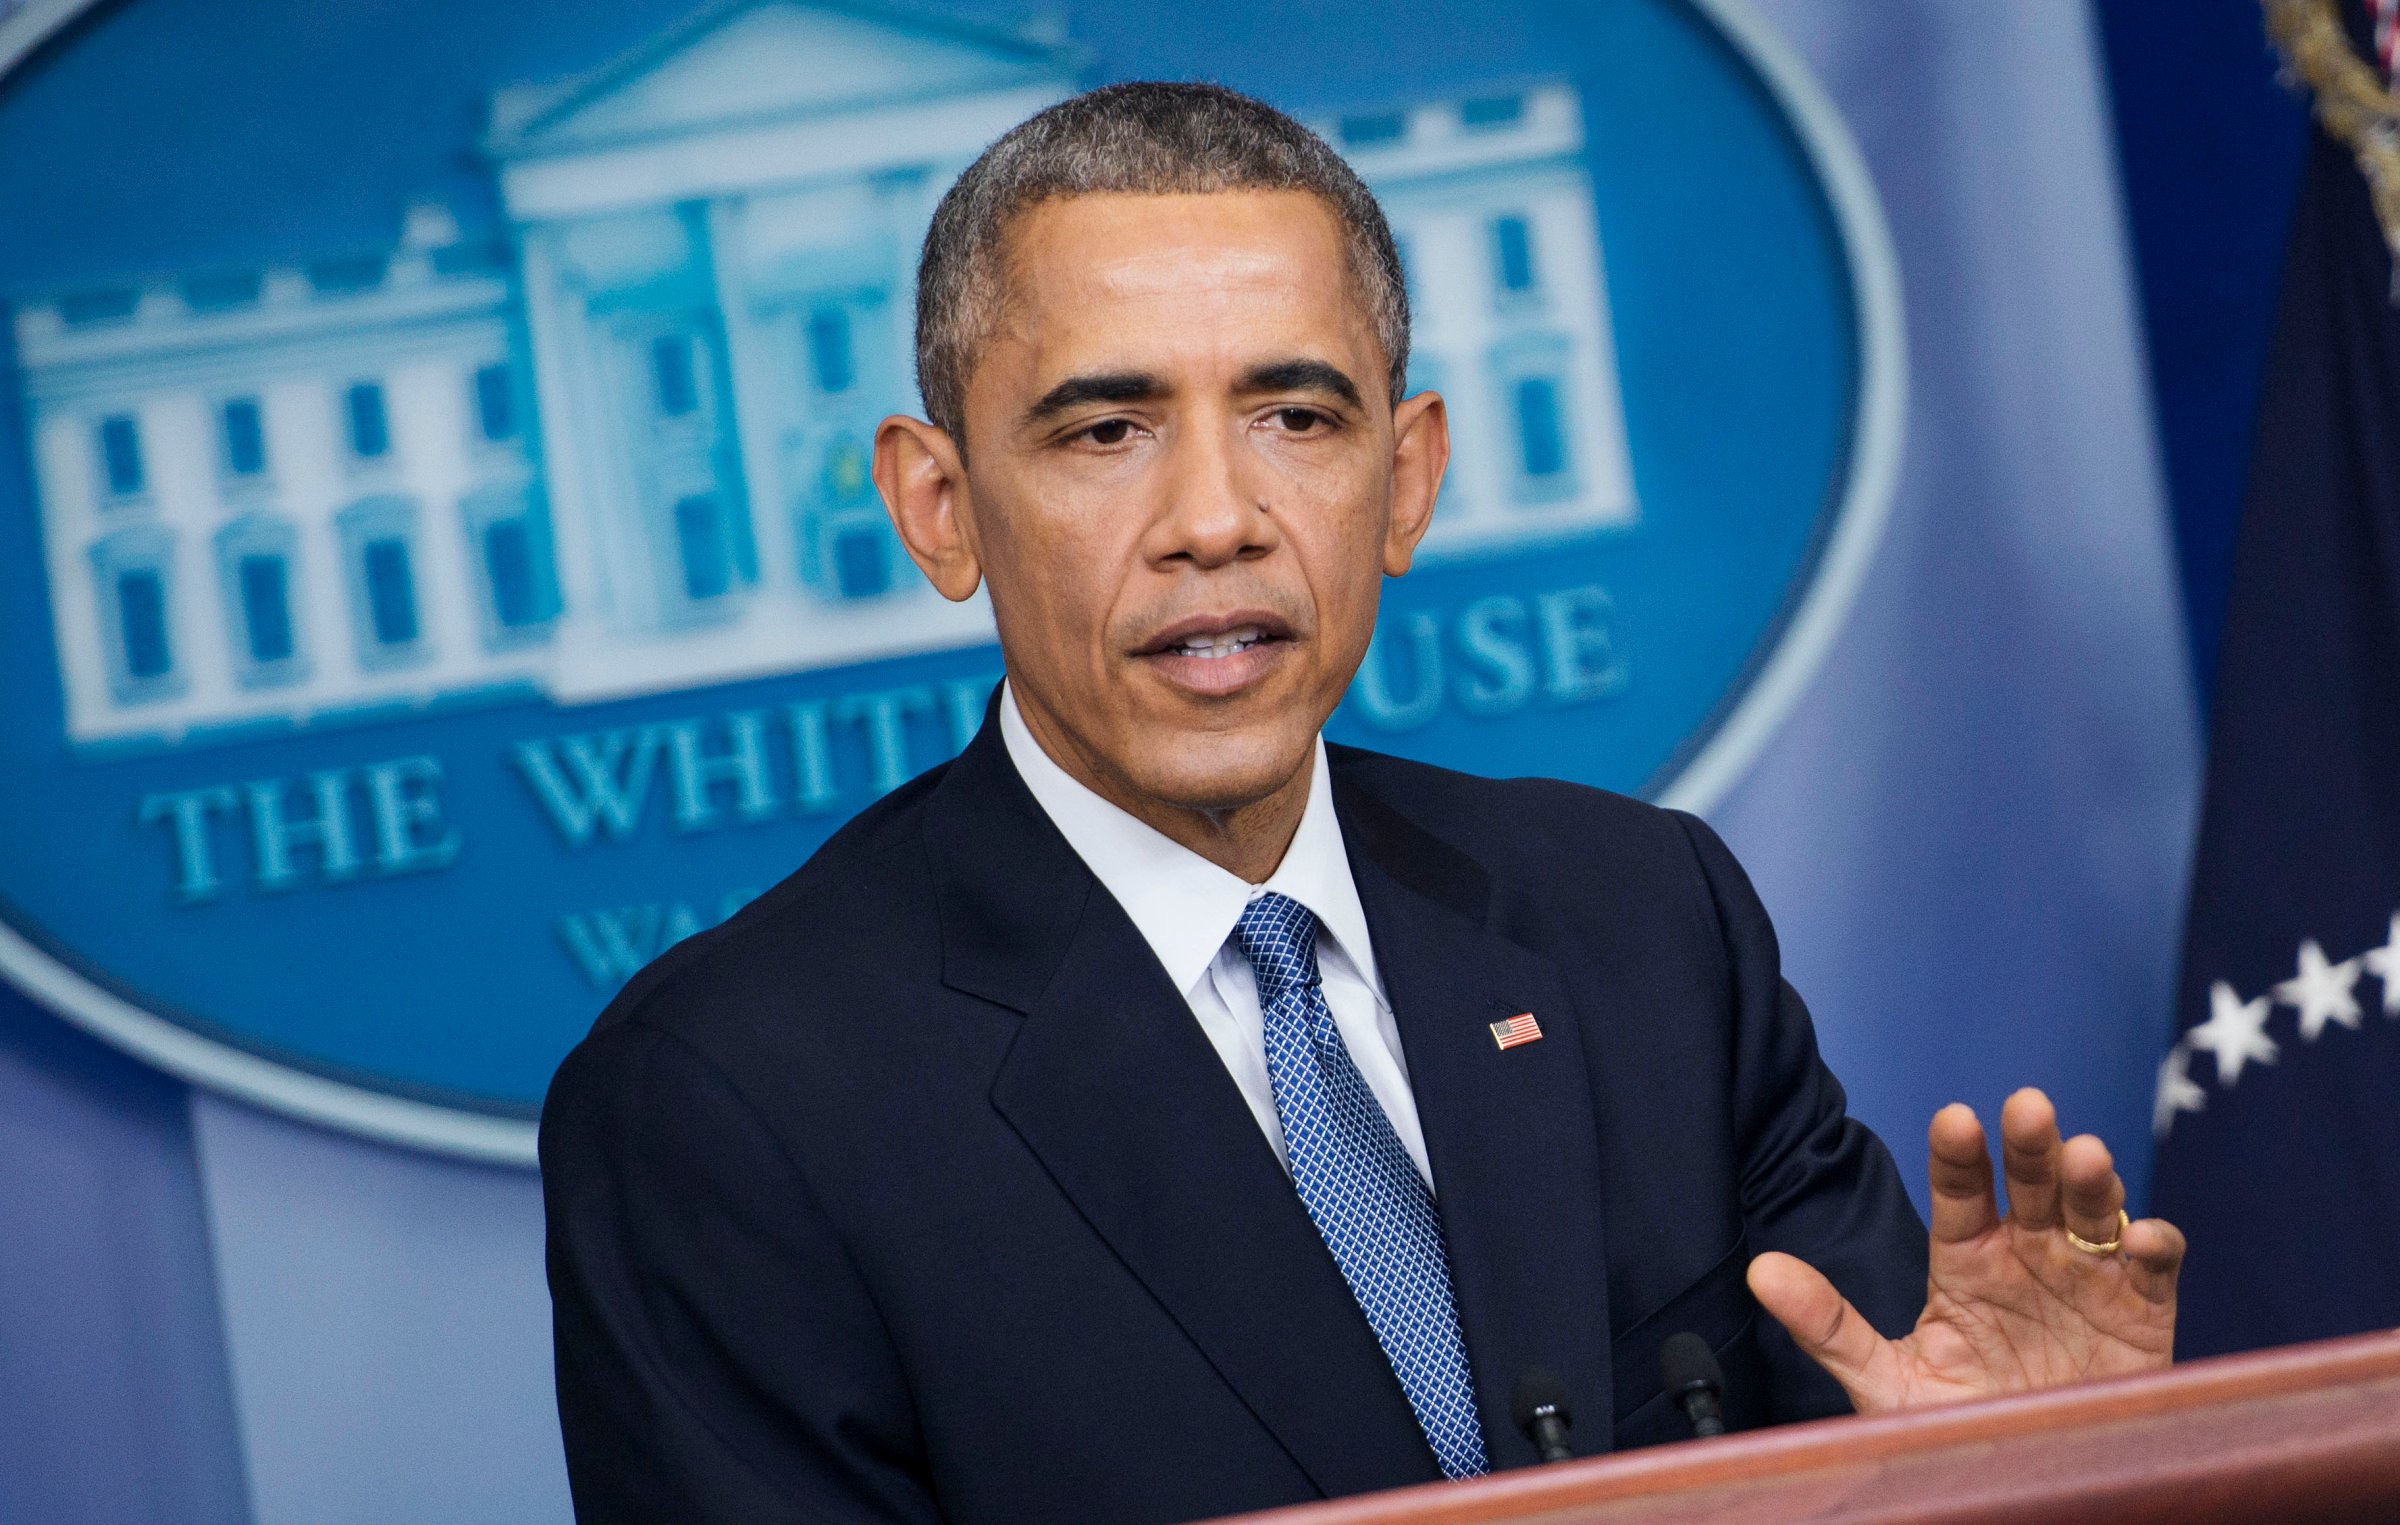 President Obama Holds News Conference At The White House